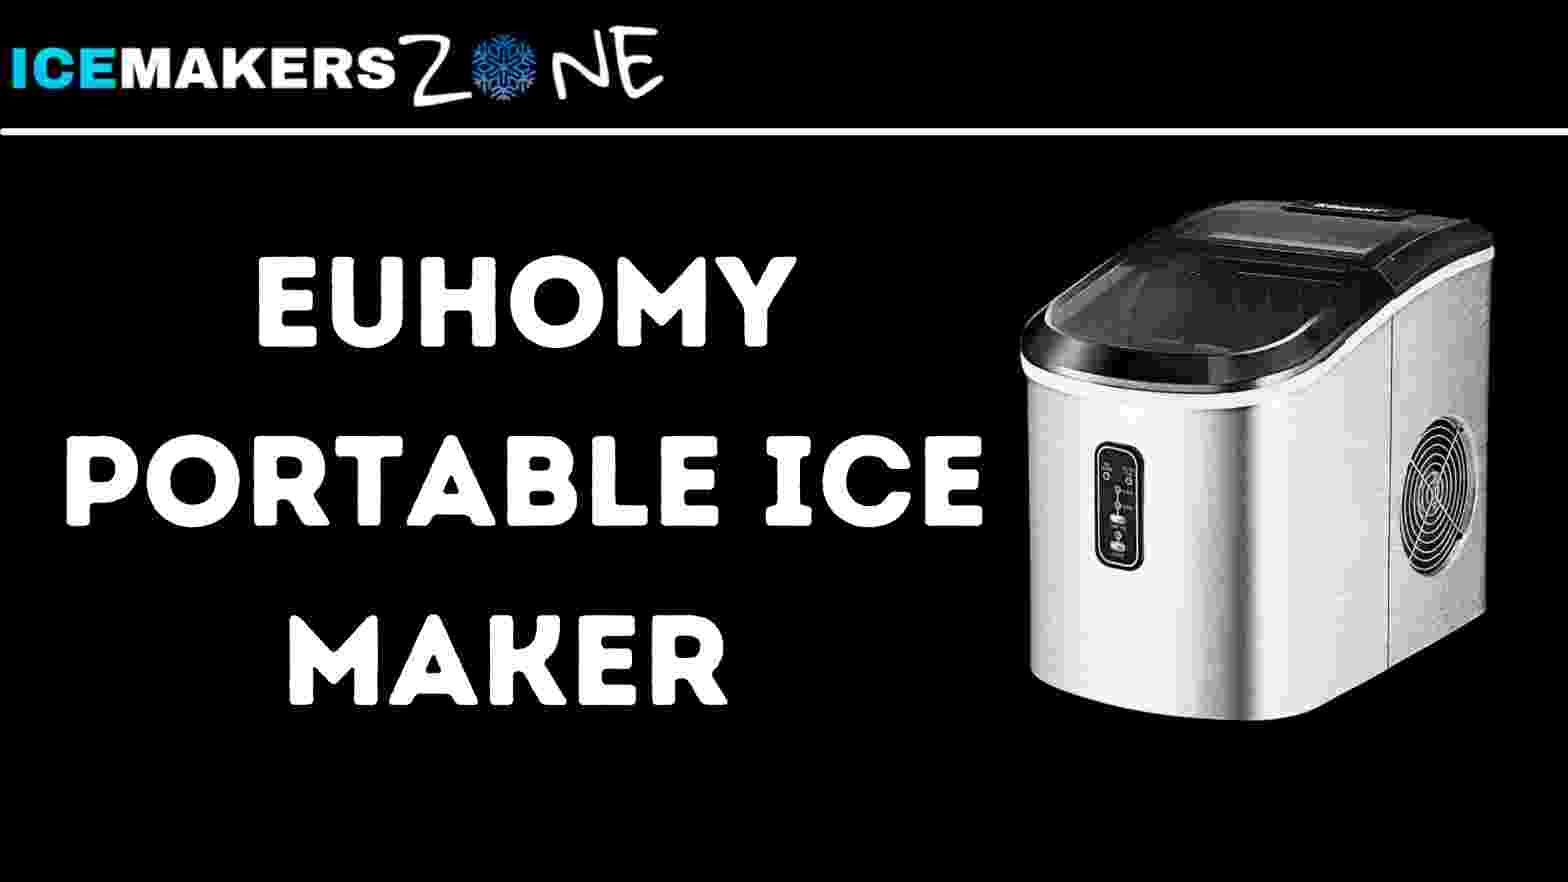 Euhomy Ice maker review